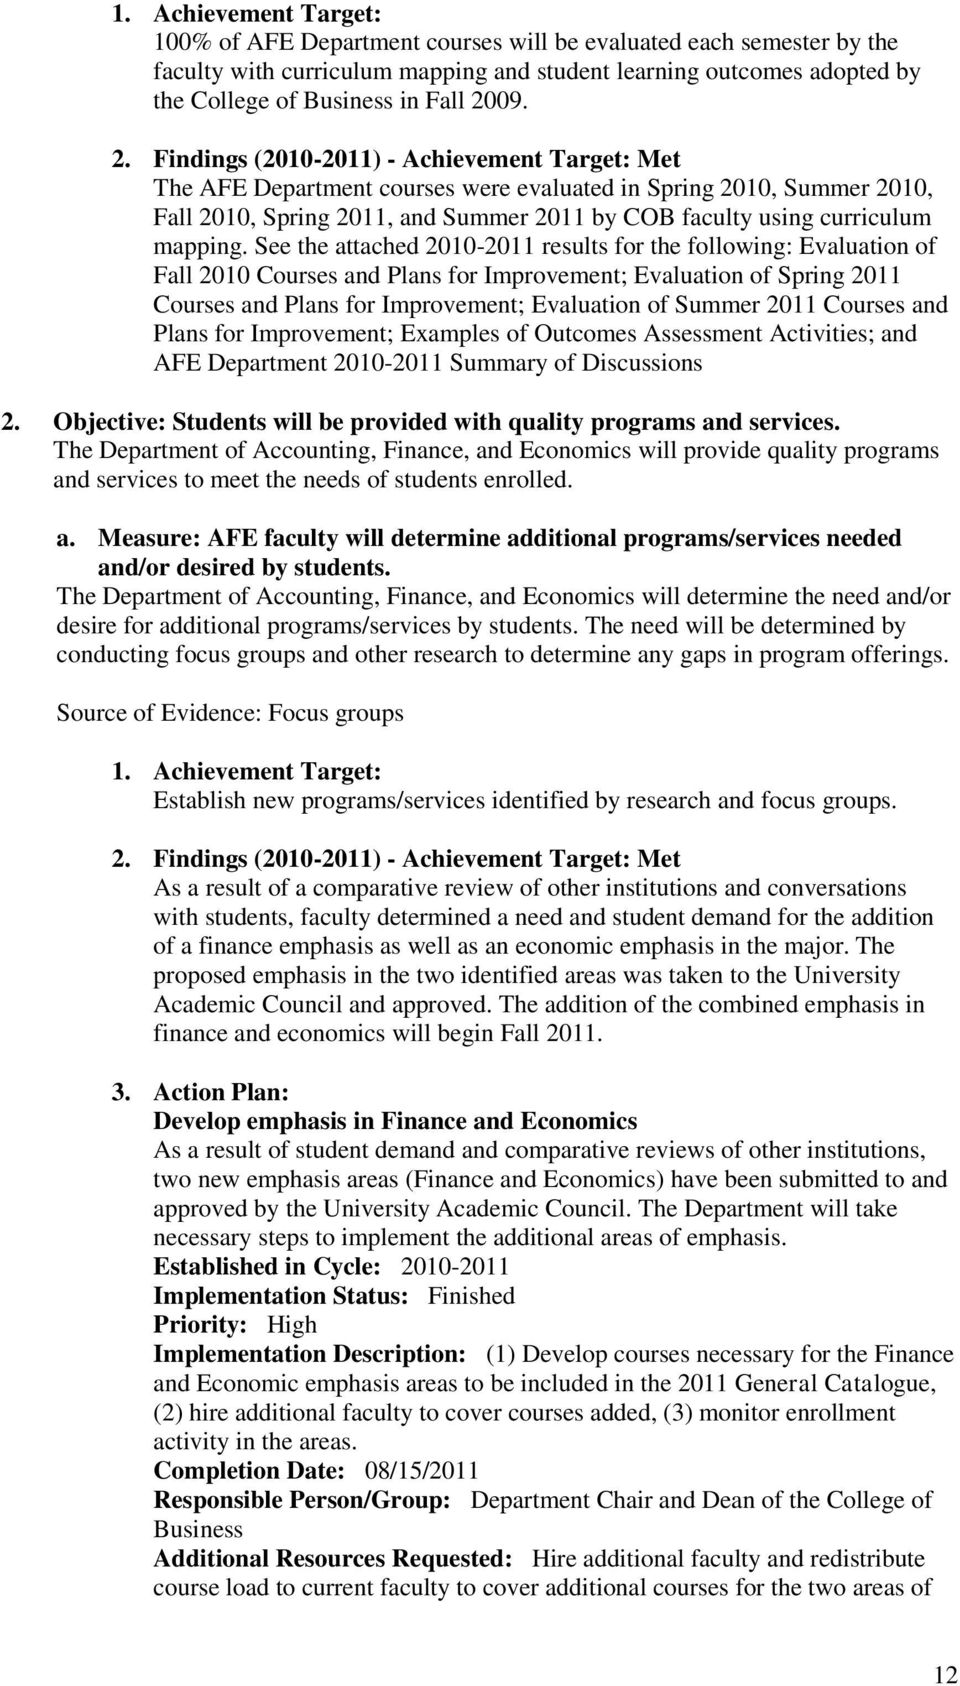 Findings (2010-2011) - Achievement Target: Met The AFE Department courses were evaluated in Spring 2010, Summer 2010, Fall 2010, Spring 2011, and Summer 2011 by COB faculty using curriculum mapping.